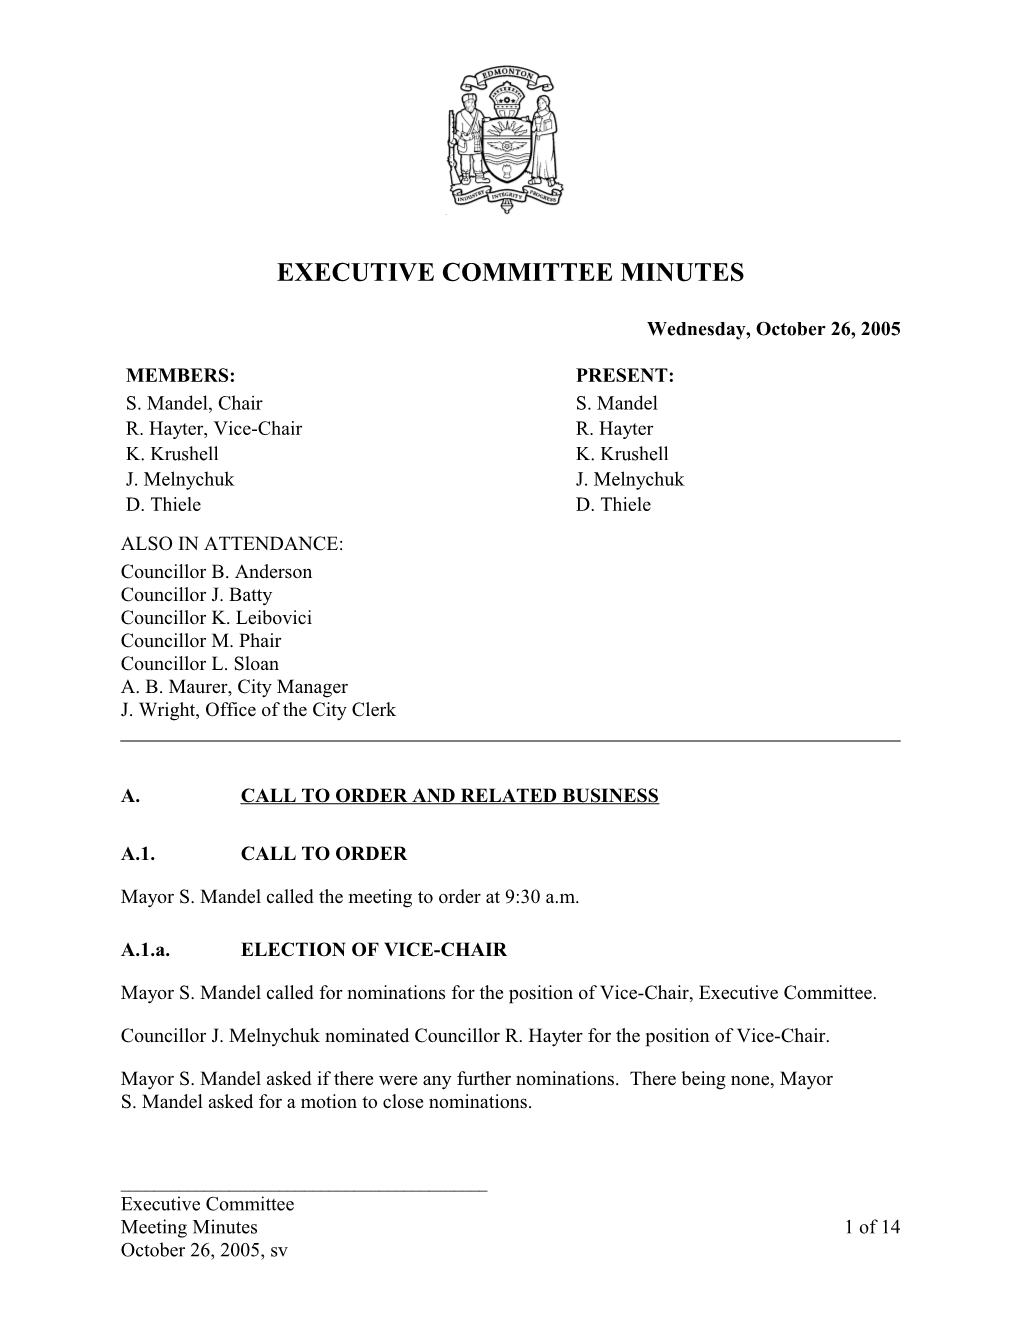 Minutes for Executive Committee October 26, 2005 Meeting